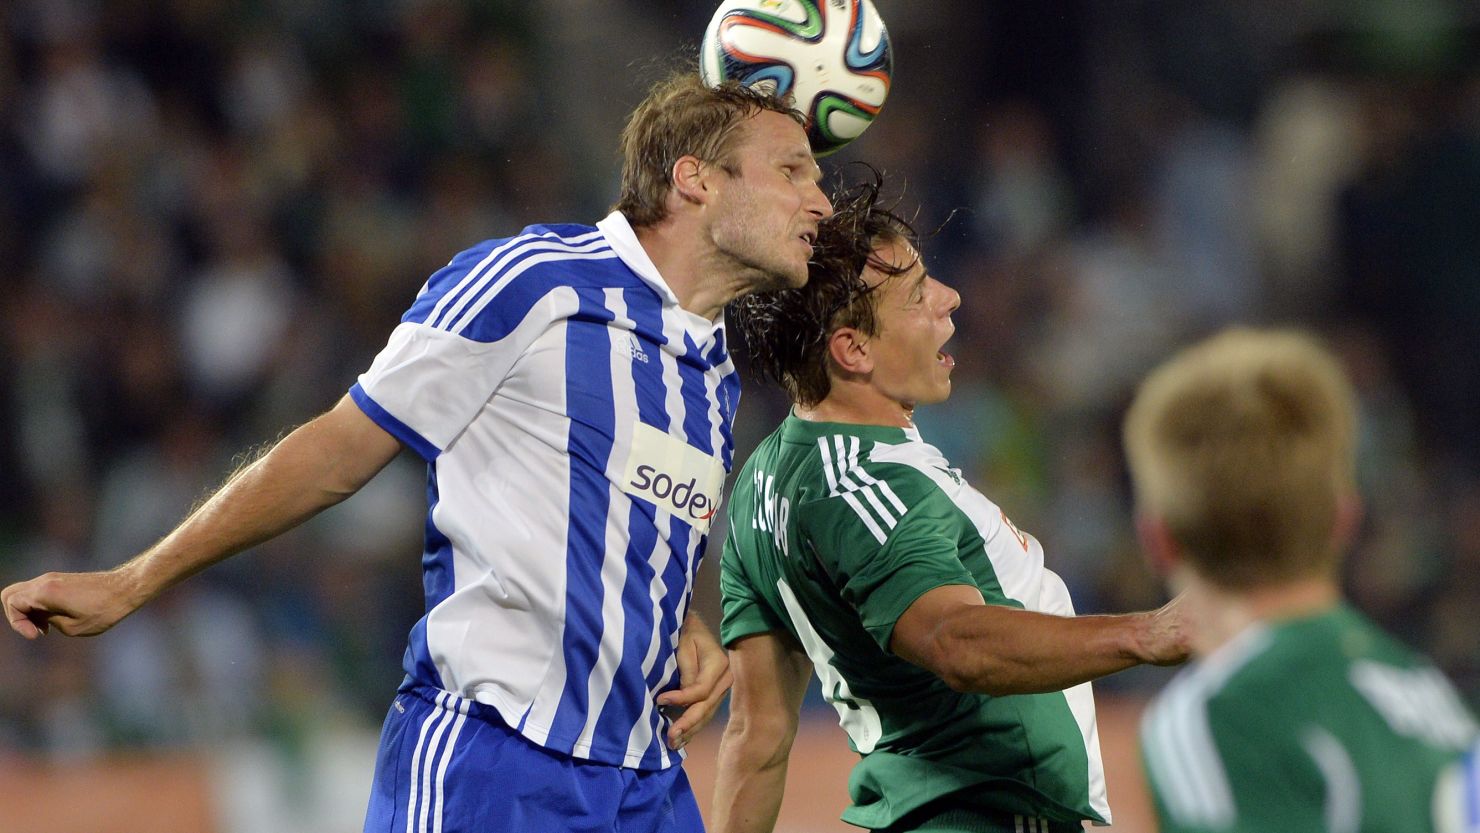 HJK became the first Finnish club to play in the Europa League group stages. HJK's Markus Heikkinen (left) is pictured.